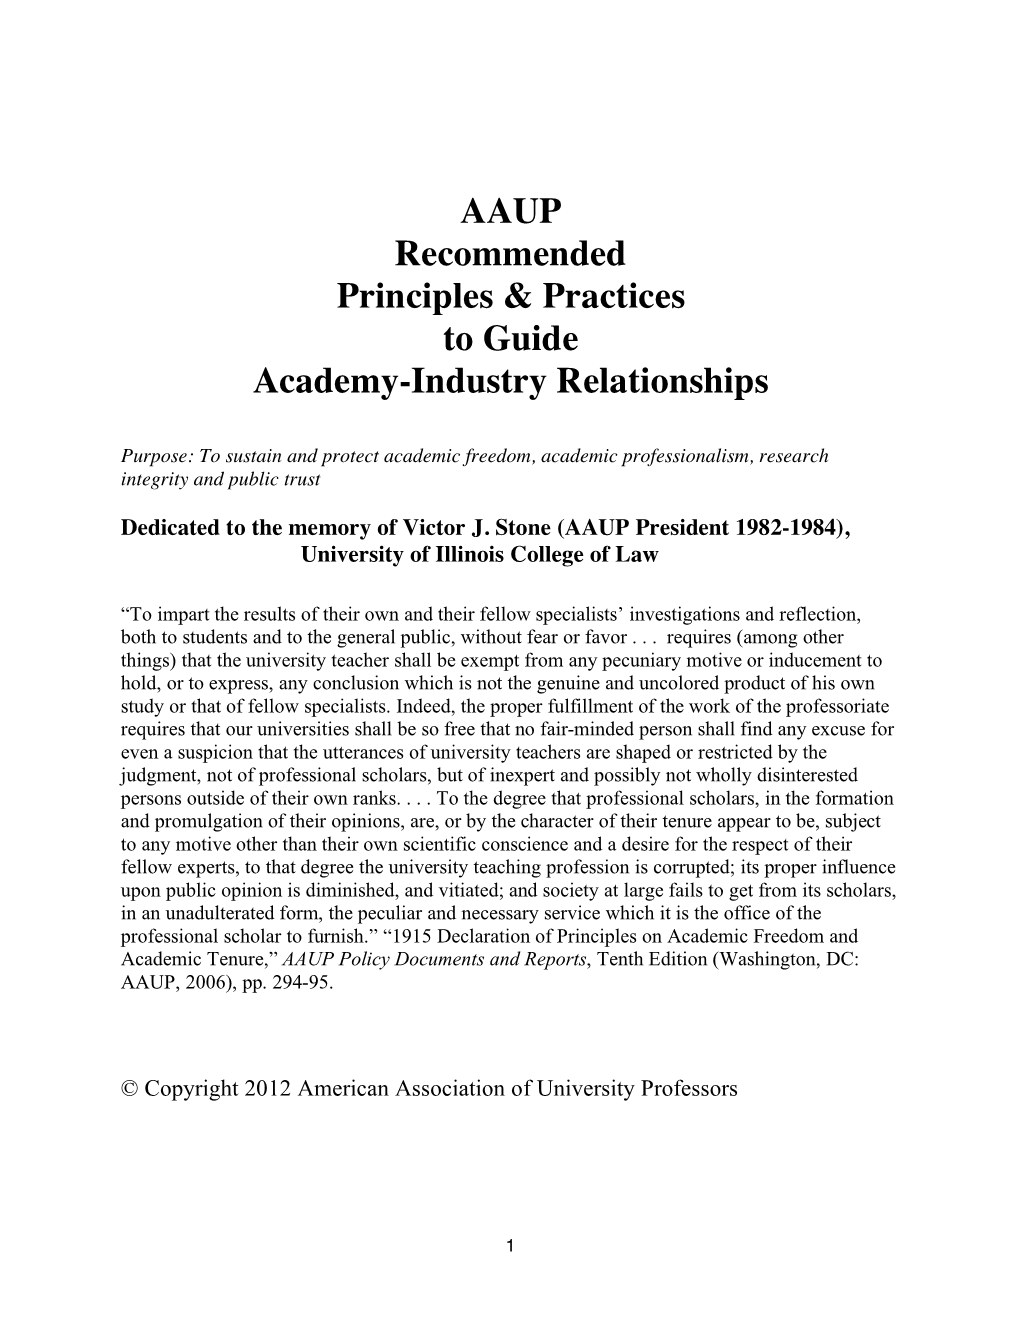 AAUP Recommended Principles & Practices to Guide Academy